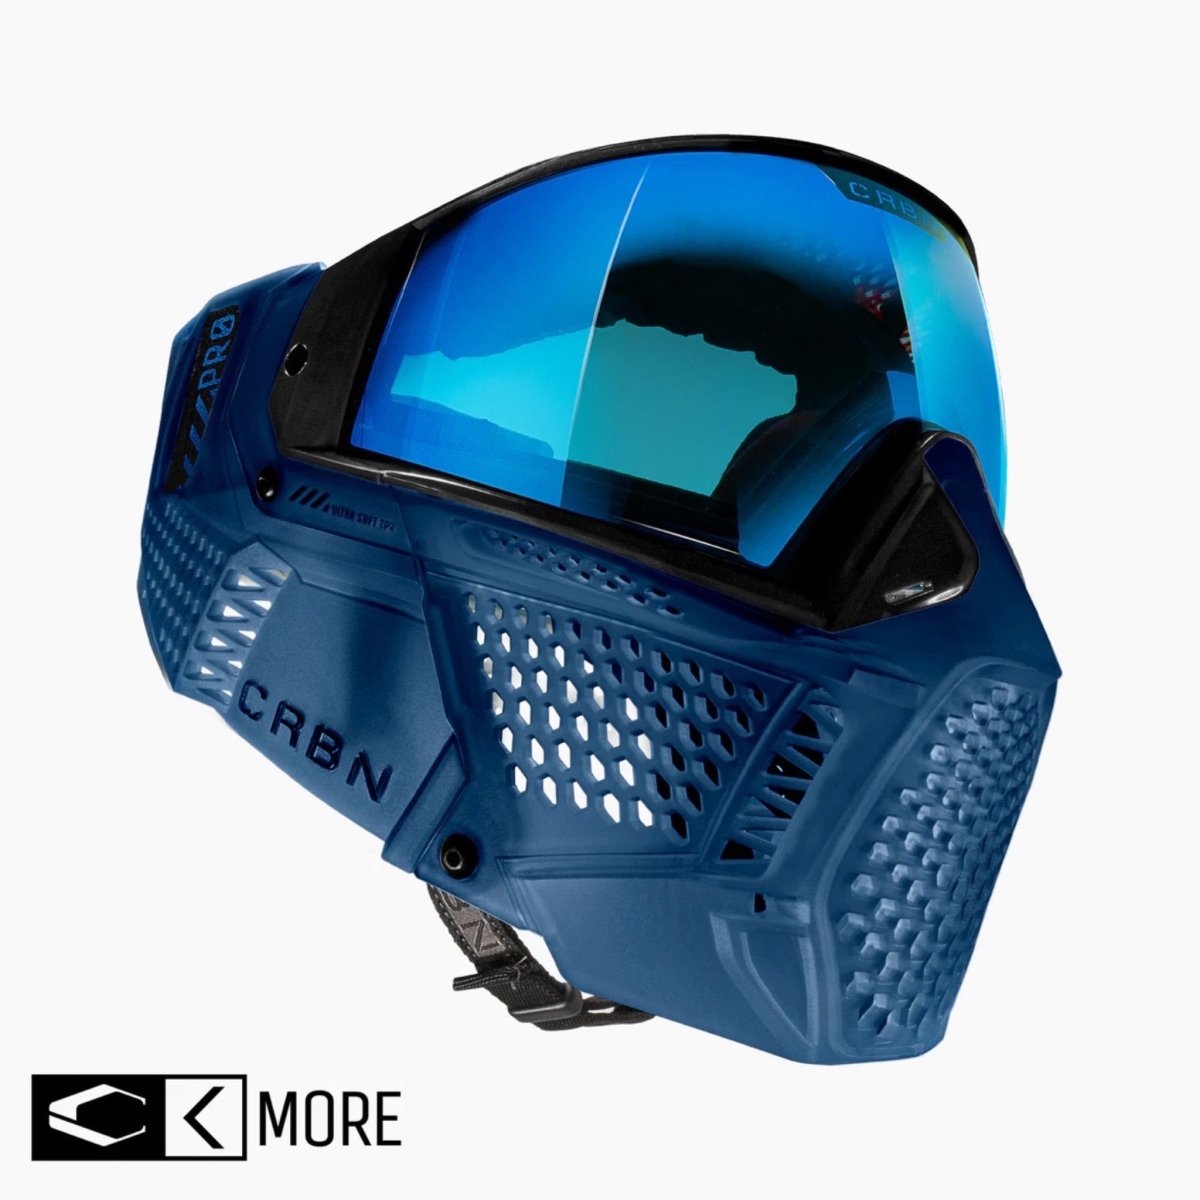 CRBN ZERO PRO Goggles - NAVY - Time 2 Paintball